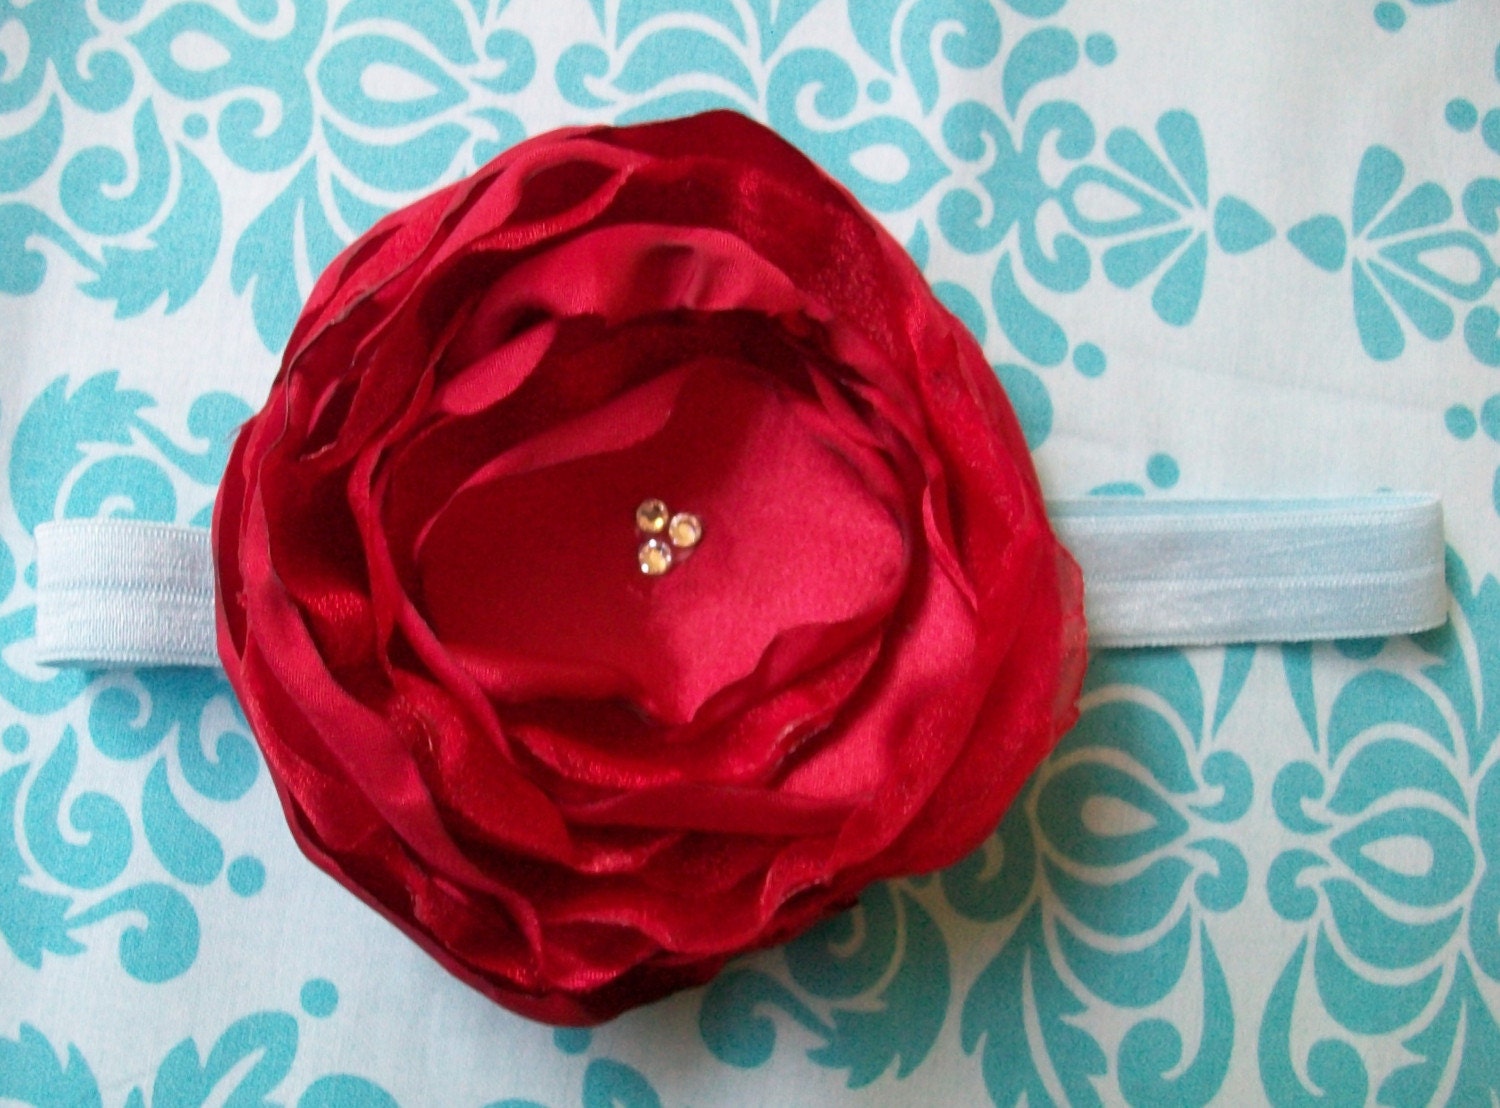 FREE SHIPPING--Sweet and Sassy Beautiful Deep Red Handmade Silk Flower on Interchangeable Soft Satin Stretch Aqua Headband ALL SIZES available-- Newborn, Baby, Toddler through Adult